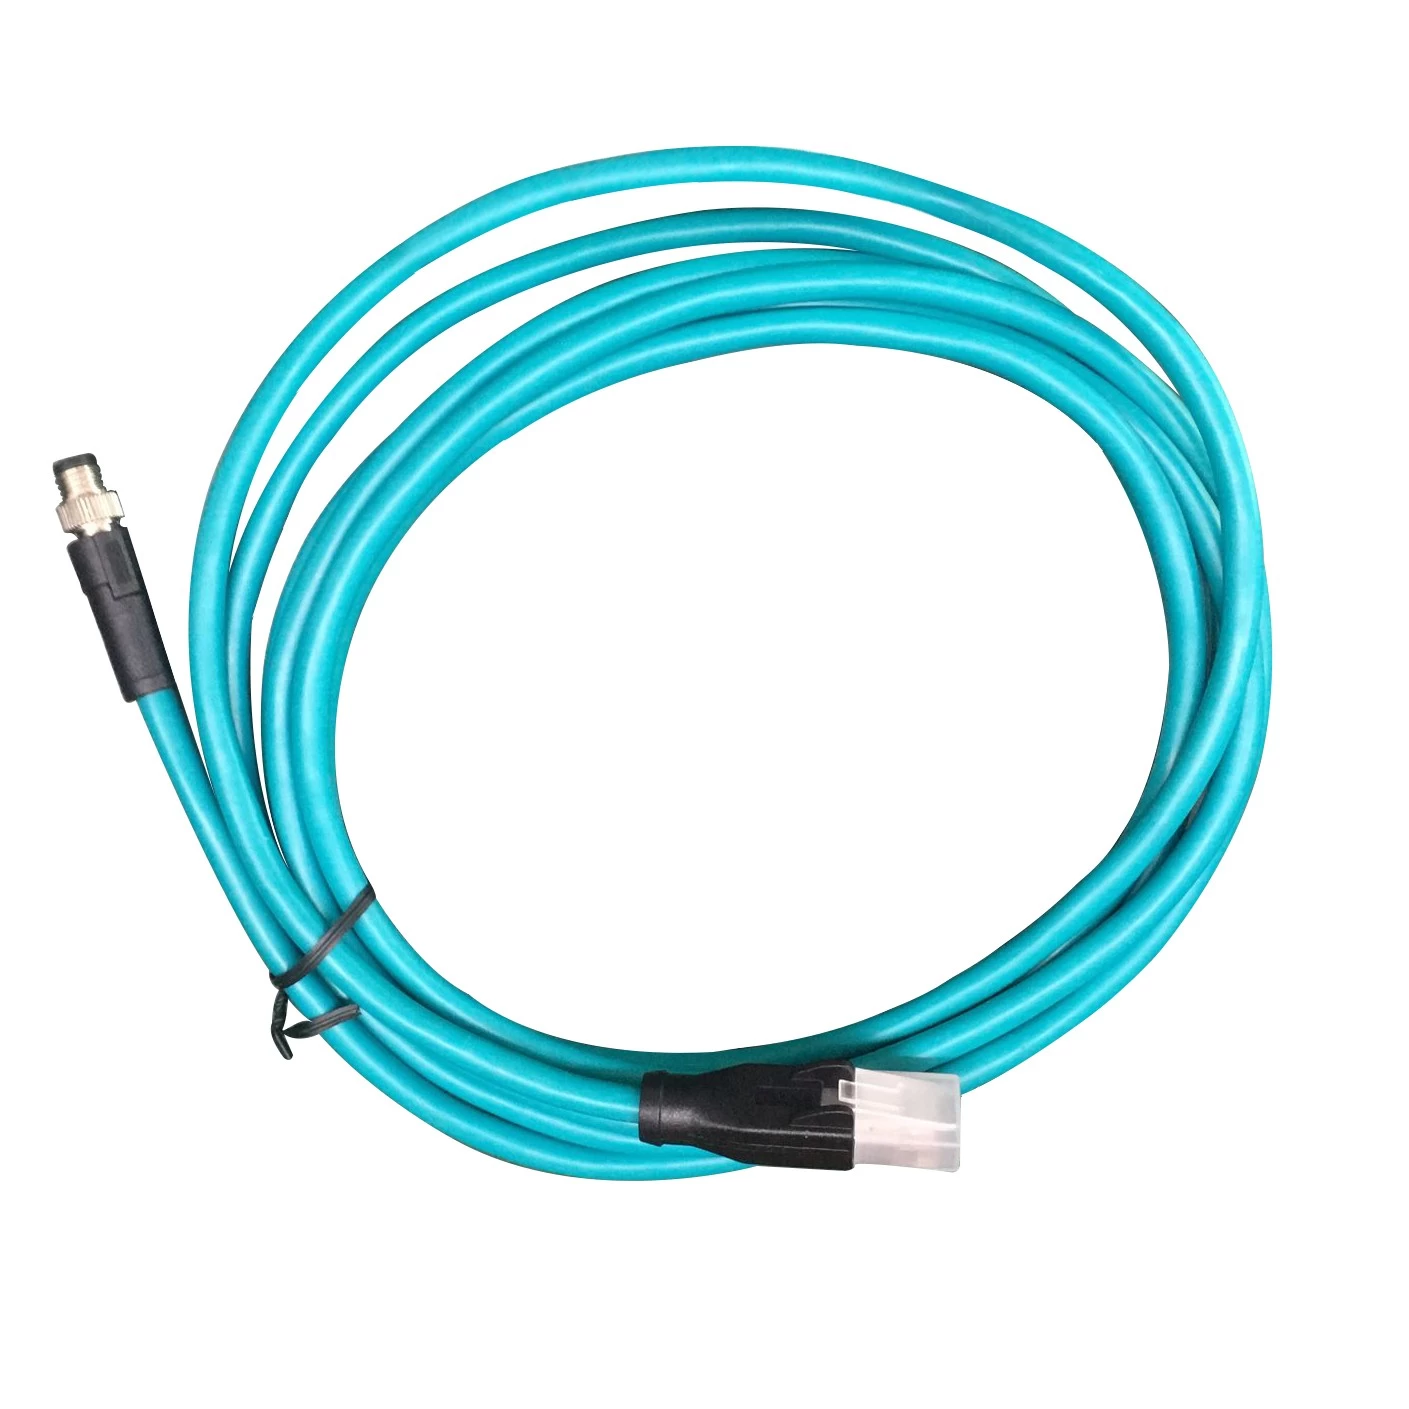 M8 D code 4 core or 8 core pair twisted M8 to RJ45 ethernet cable